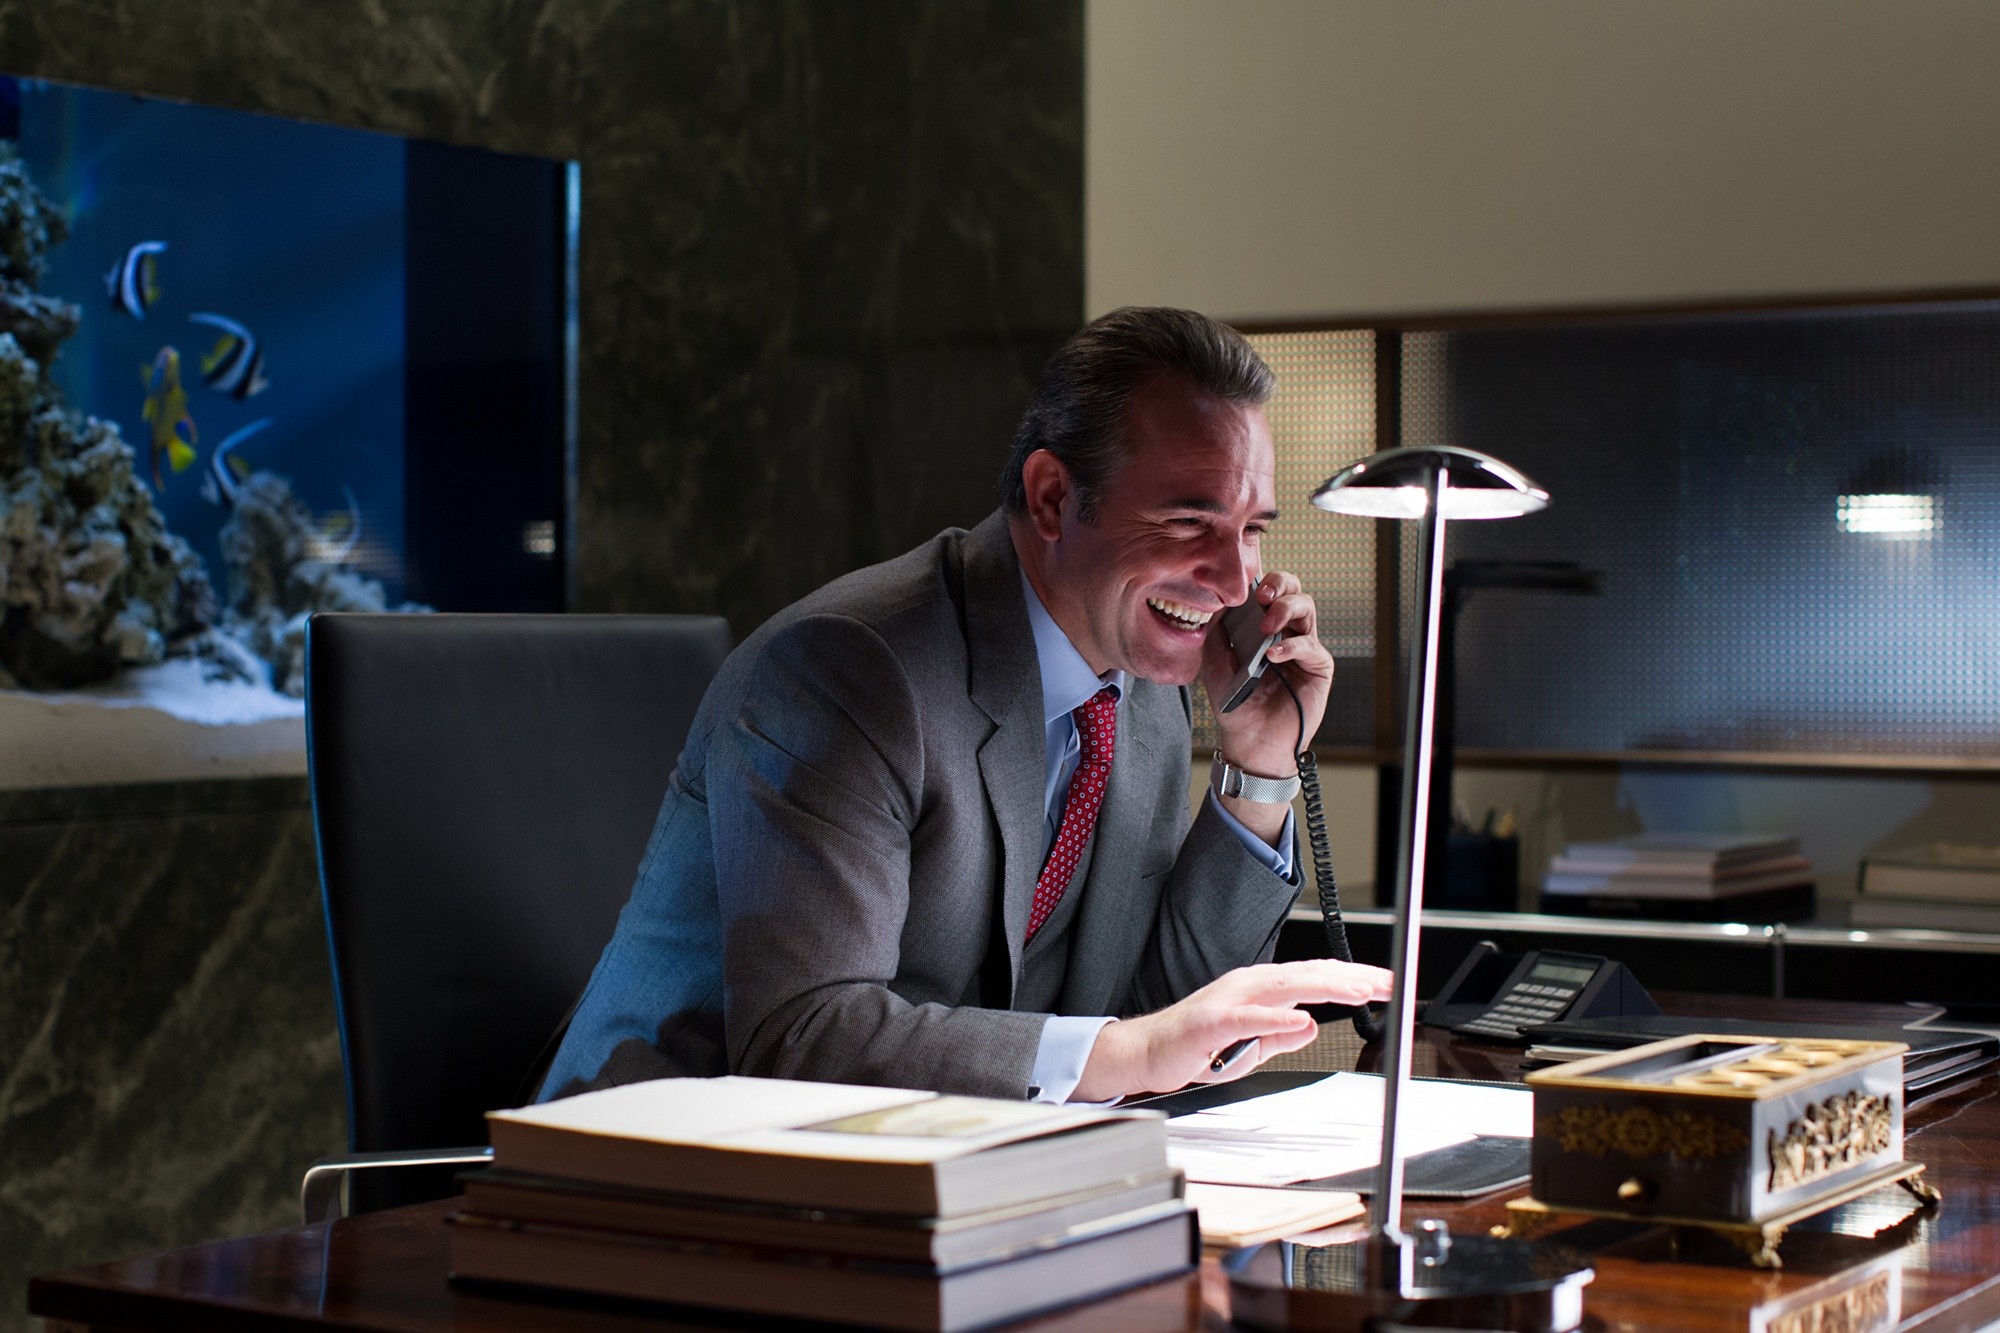 Jean Dujardin stars as Jean Jacques Saurel in Paramount Pictures' The Wolf of Wall Street (2013)